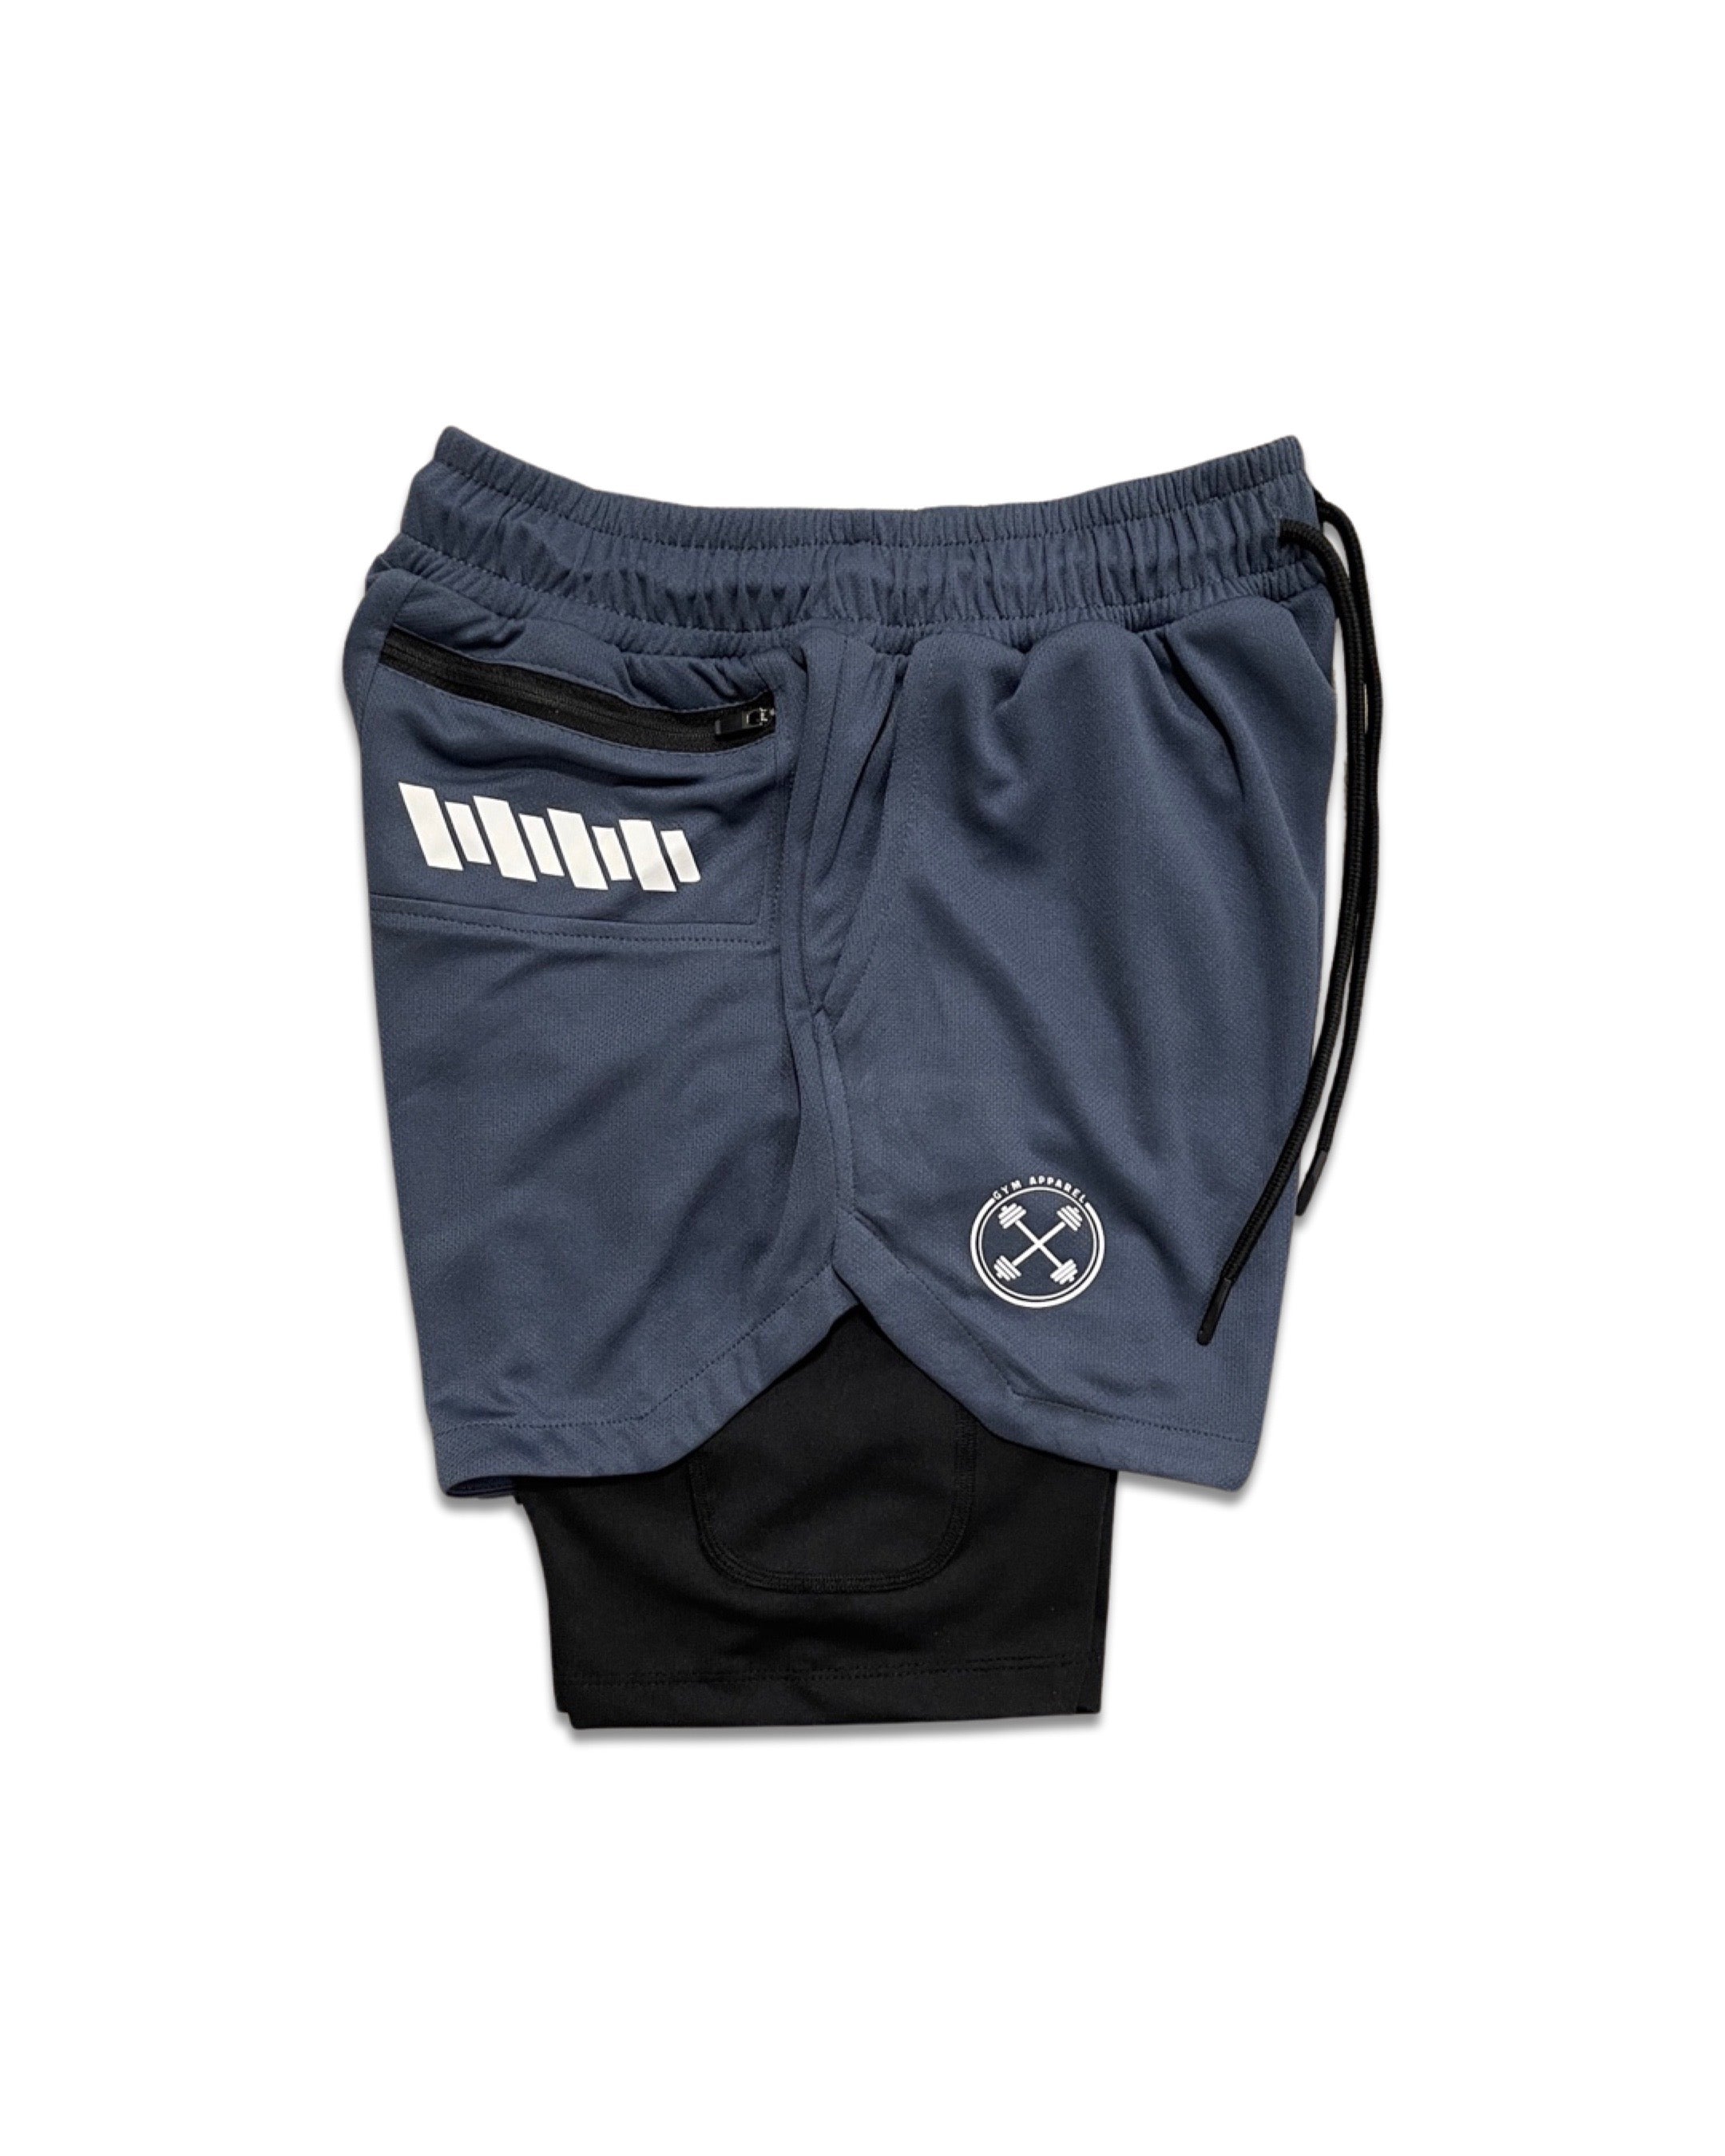 2 in 1 Functional Training Shorts [Limited Colors] - Shorts - Gym Apparel Egypt